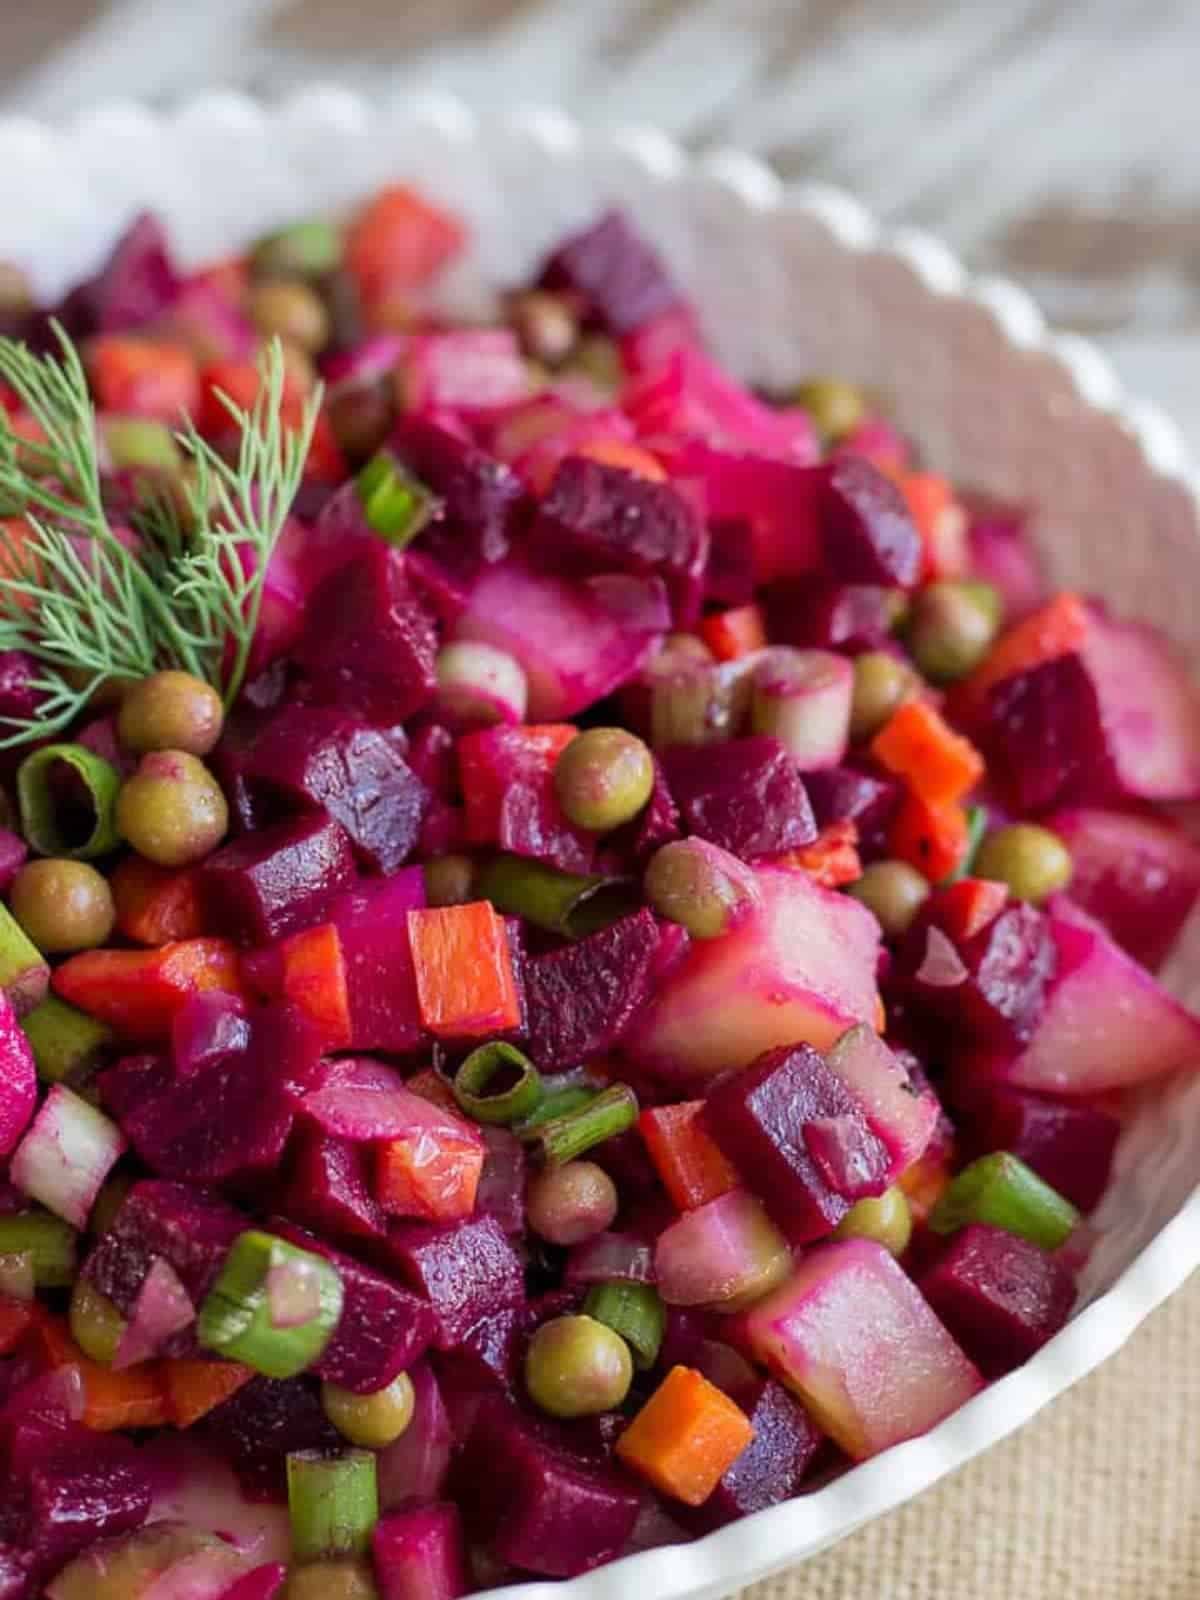 Beet and potato salad in a white bowl